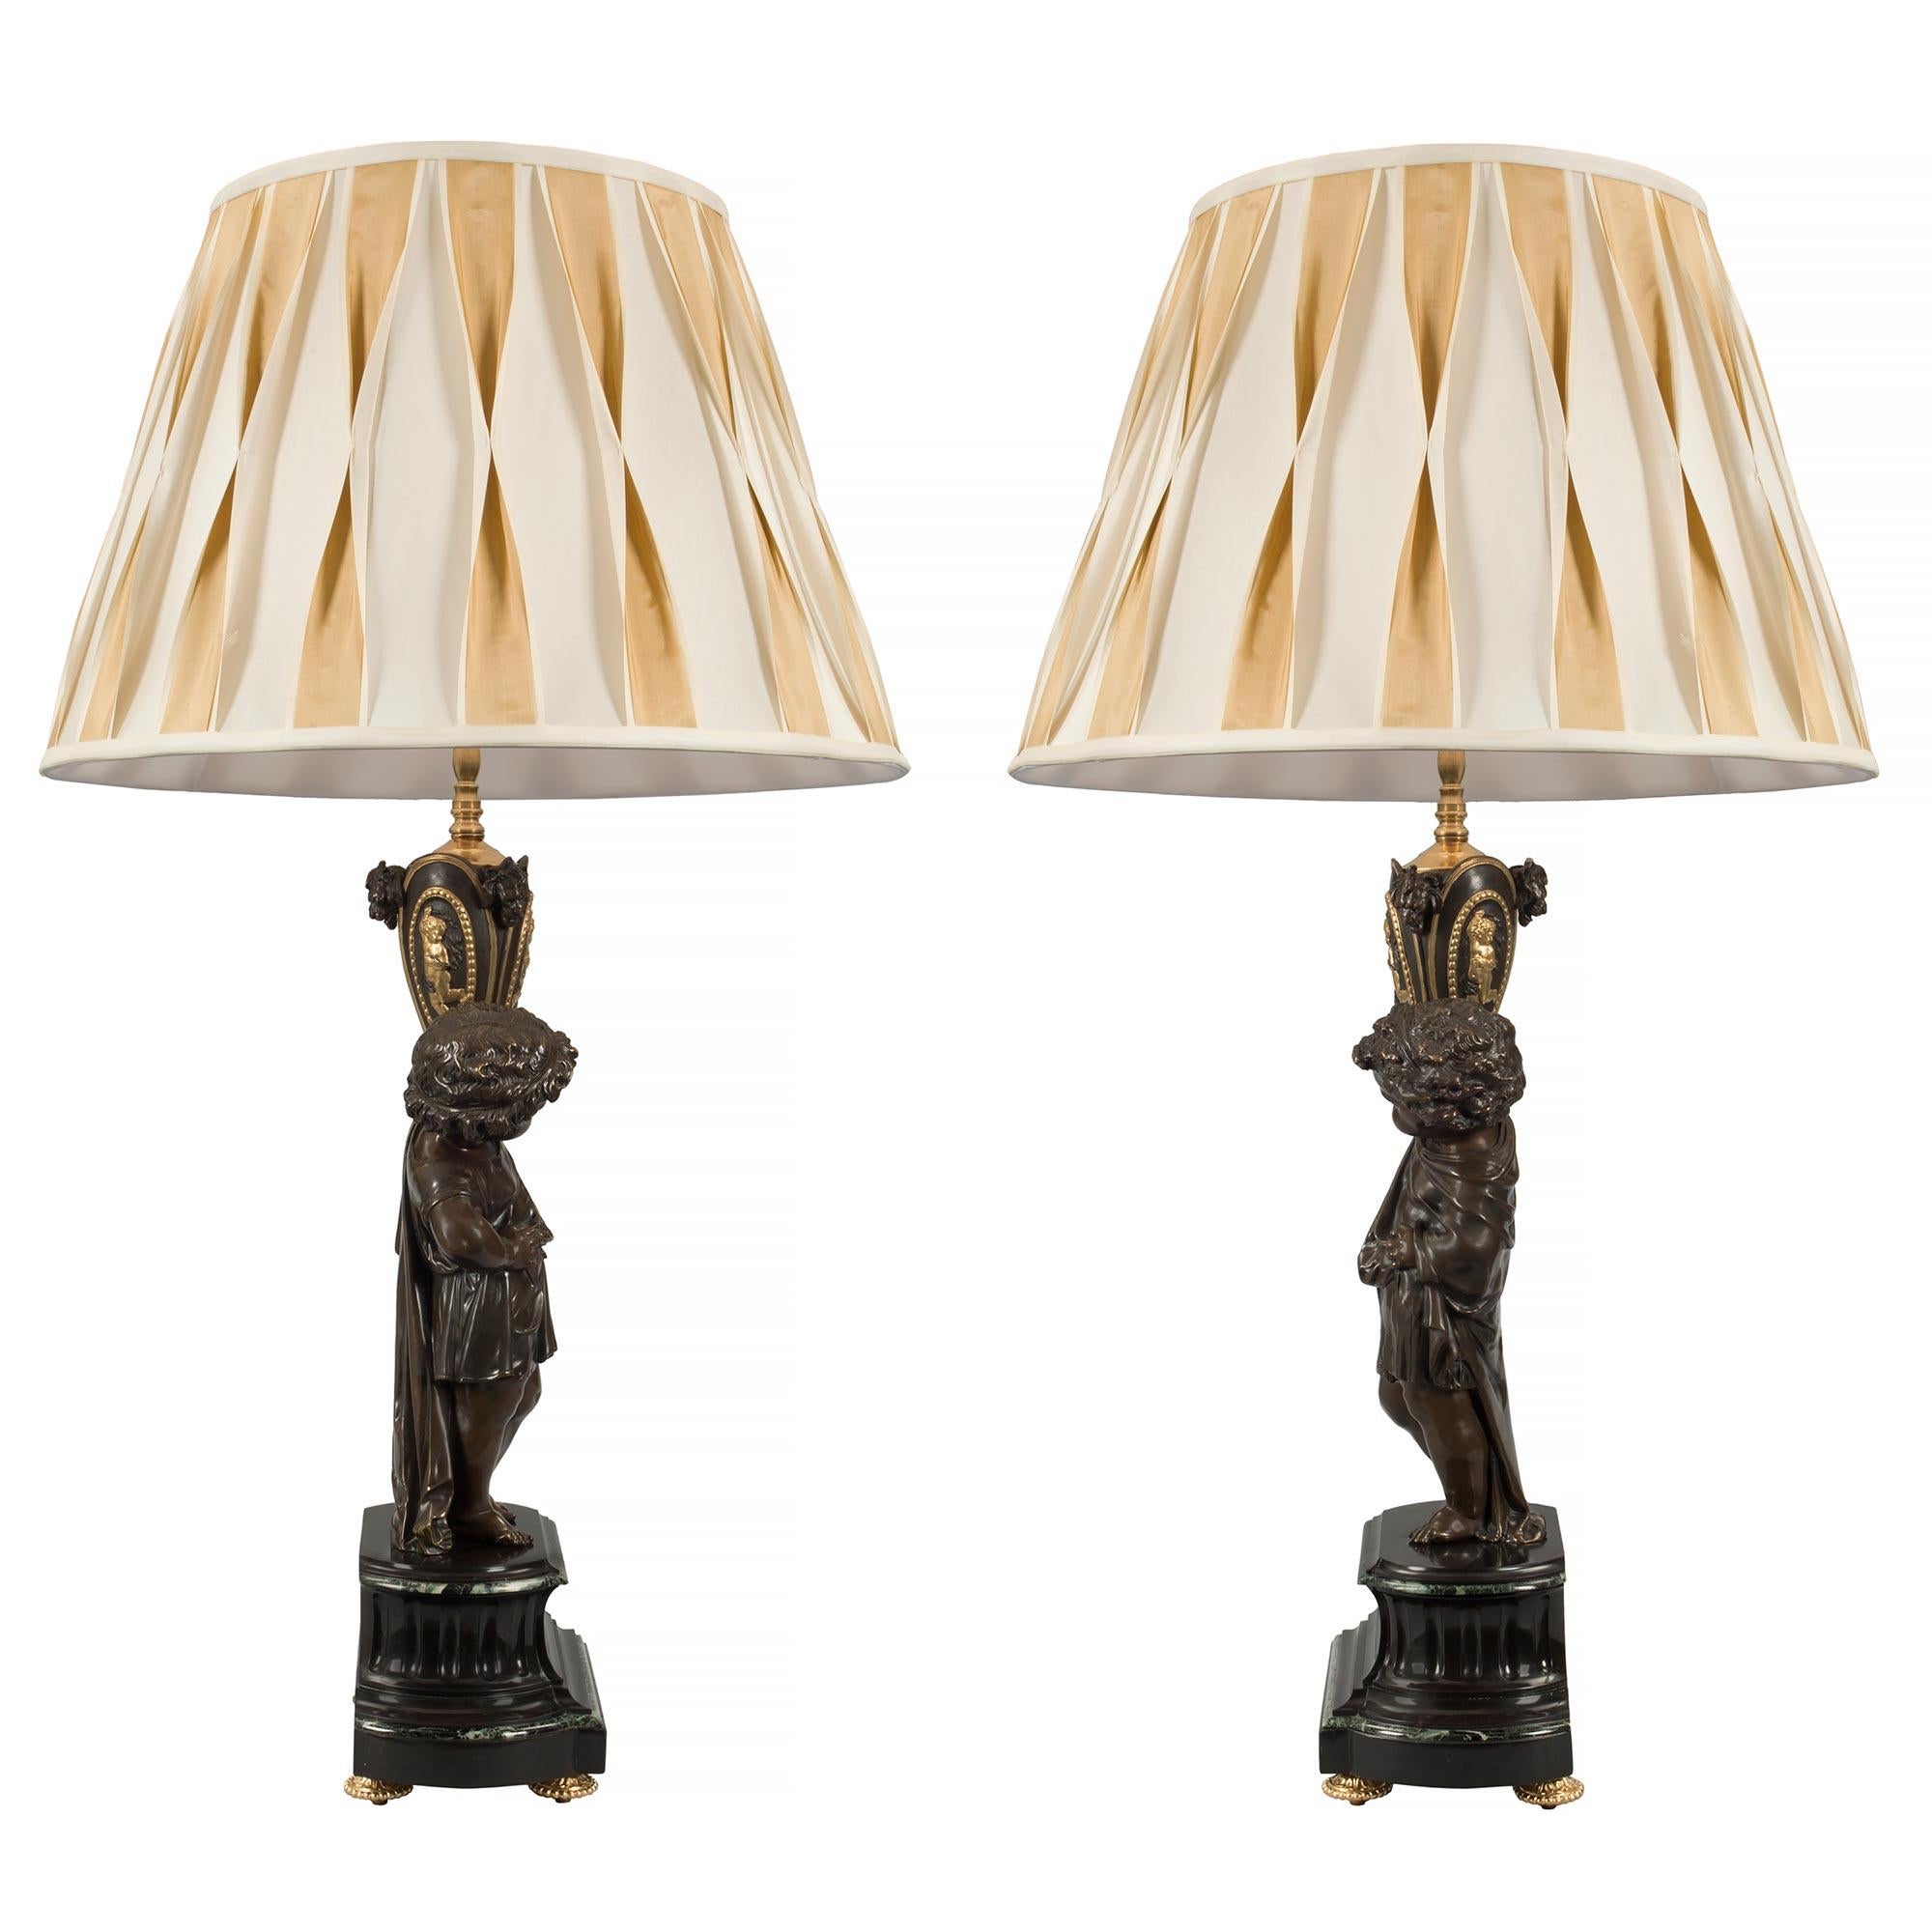 A beautiful and high quality true pair of French 19th century Louis XVI st. Belle Époque period patinated bronze and marble lamps. Each lamp is raised by a striking black Belgian and Vert de Patricia marble base with ormolu topie shaped feet and and